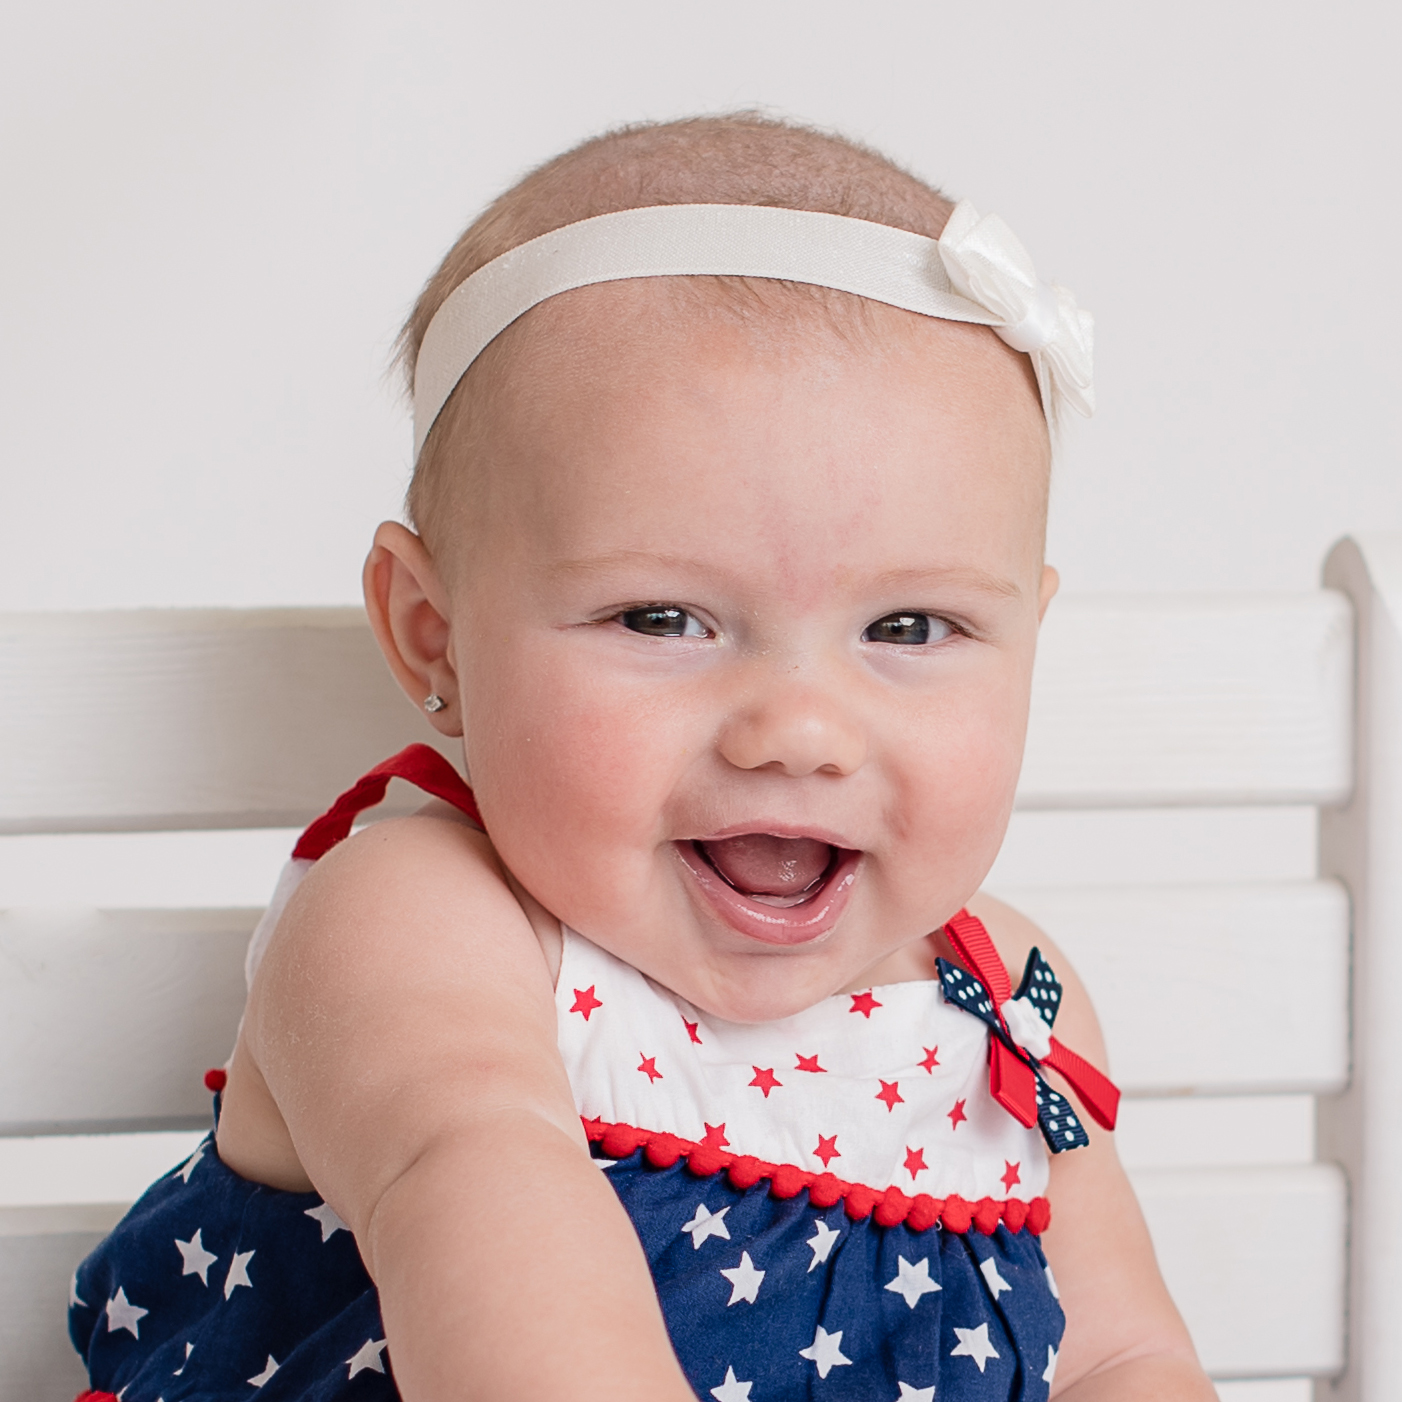 happy july 4th | family session | lori pickens photography